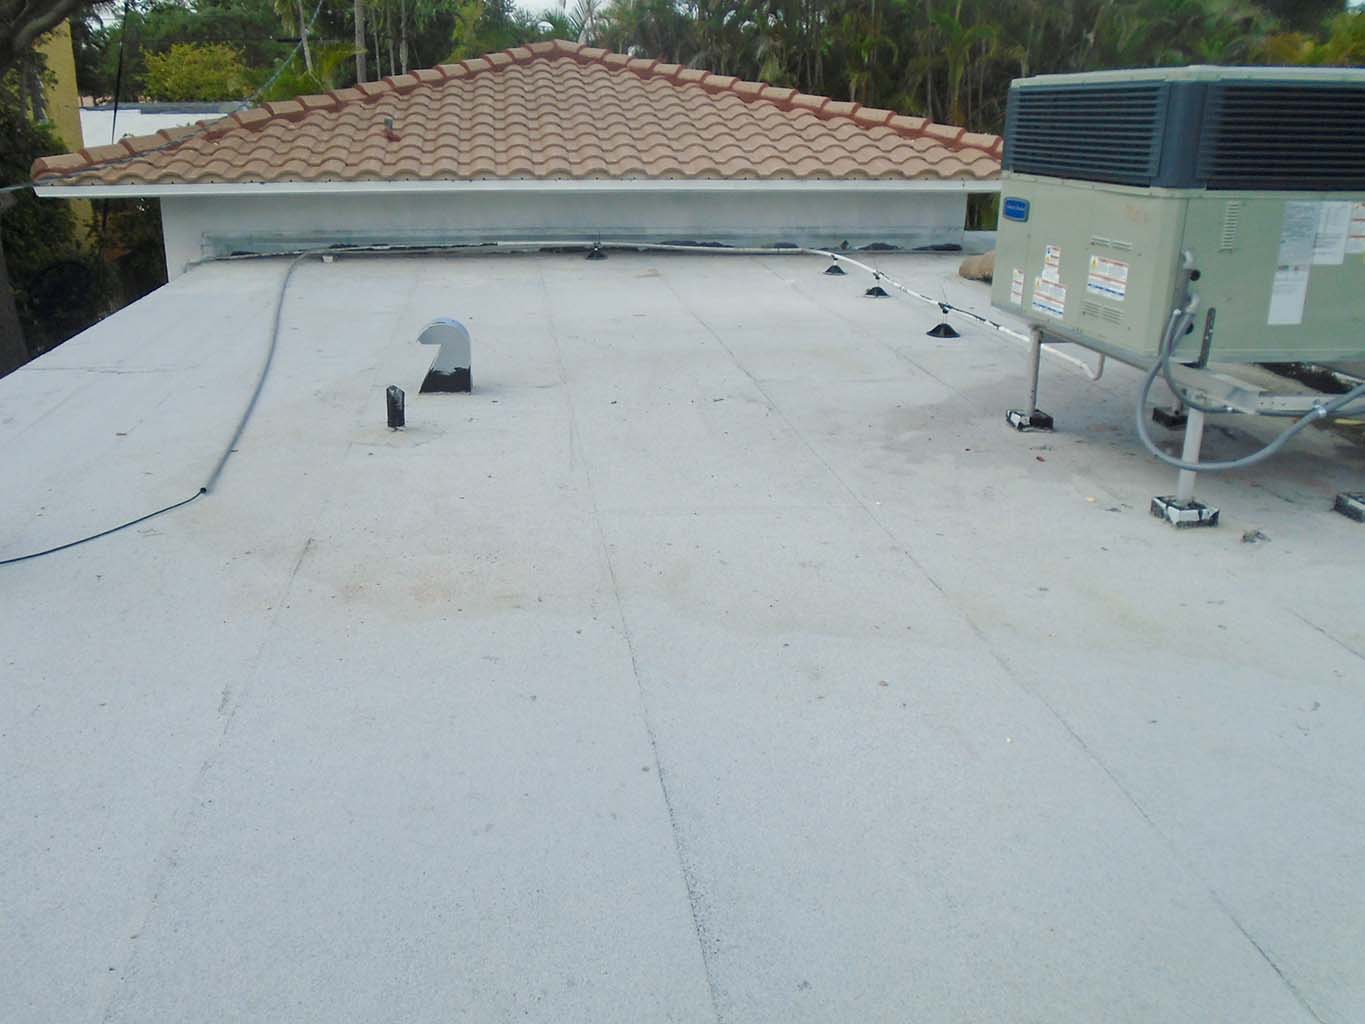 Replaced flat roof with addition tile roof in background